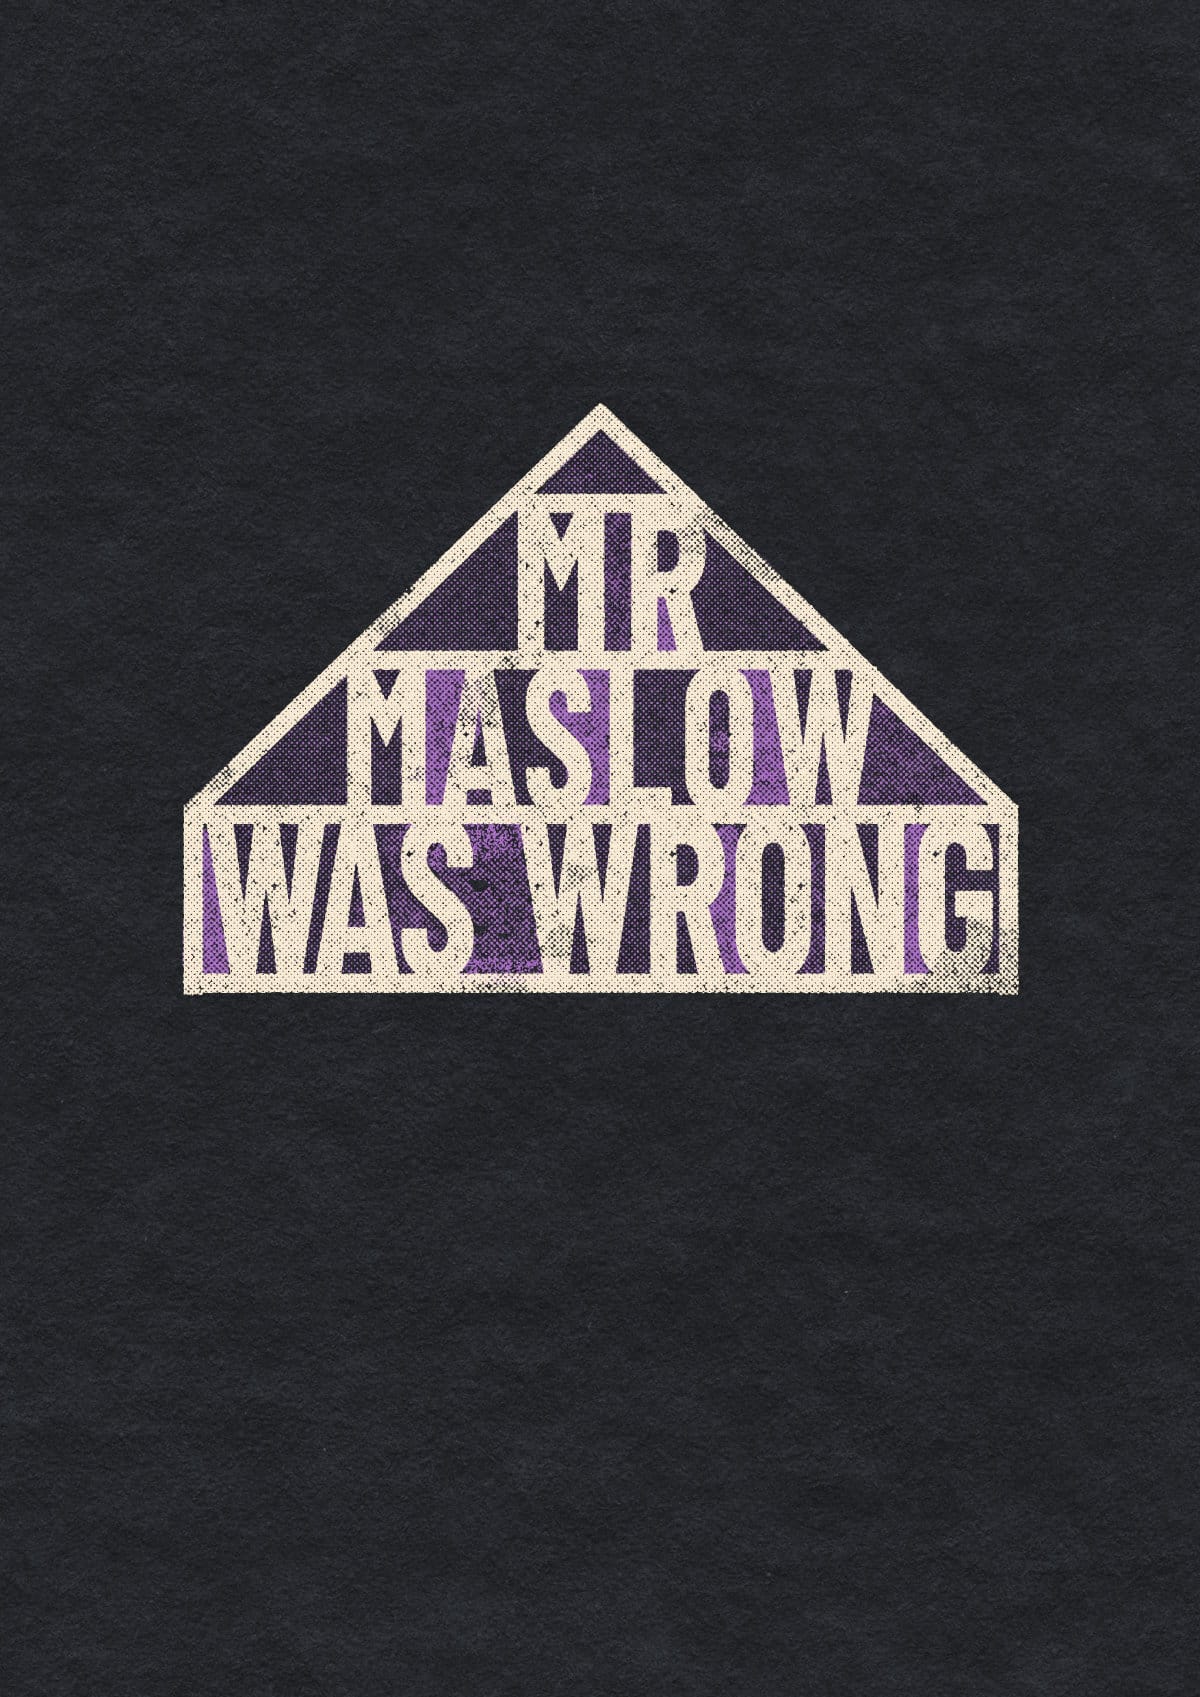 Mr. Maslow was wrong – Poster by Michael Leonhartsberger